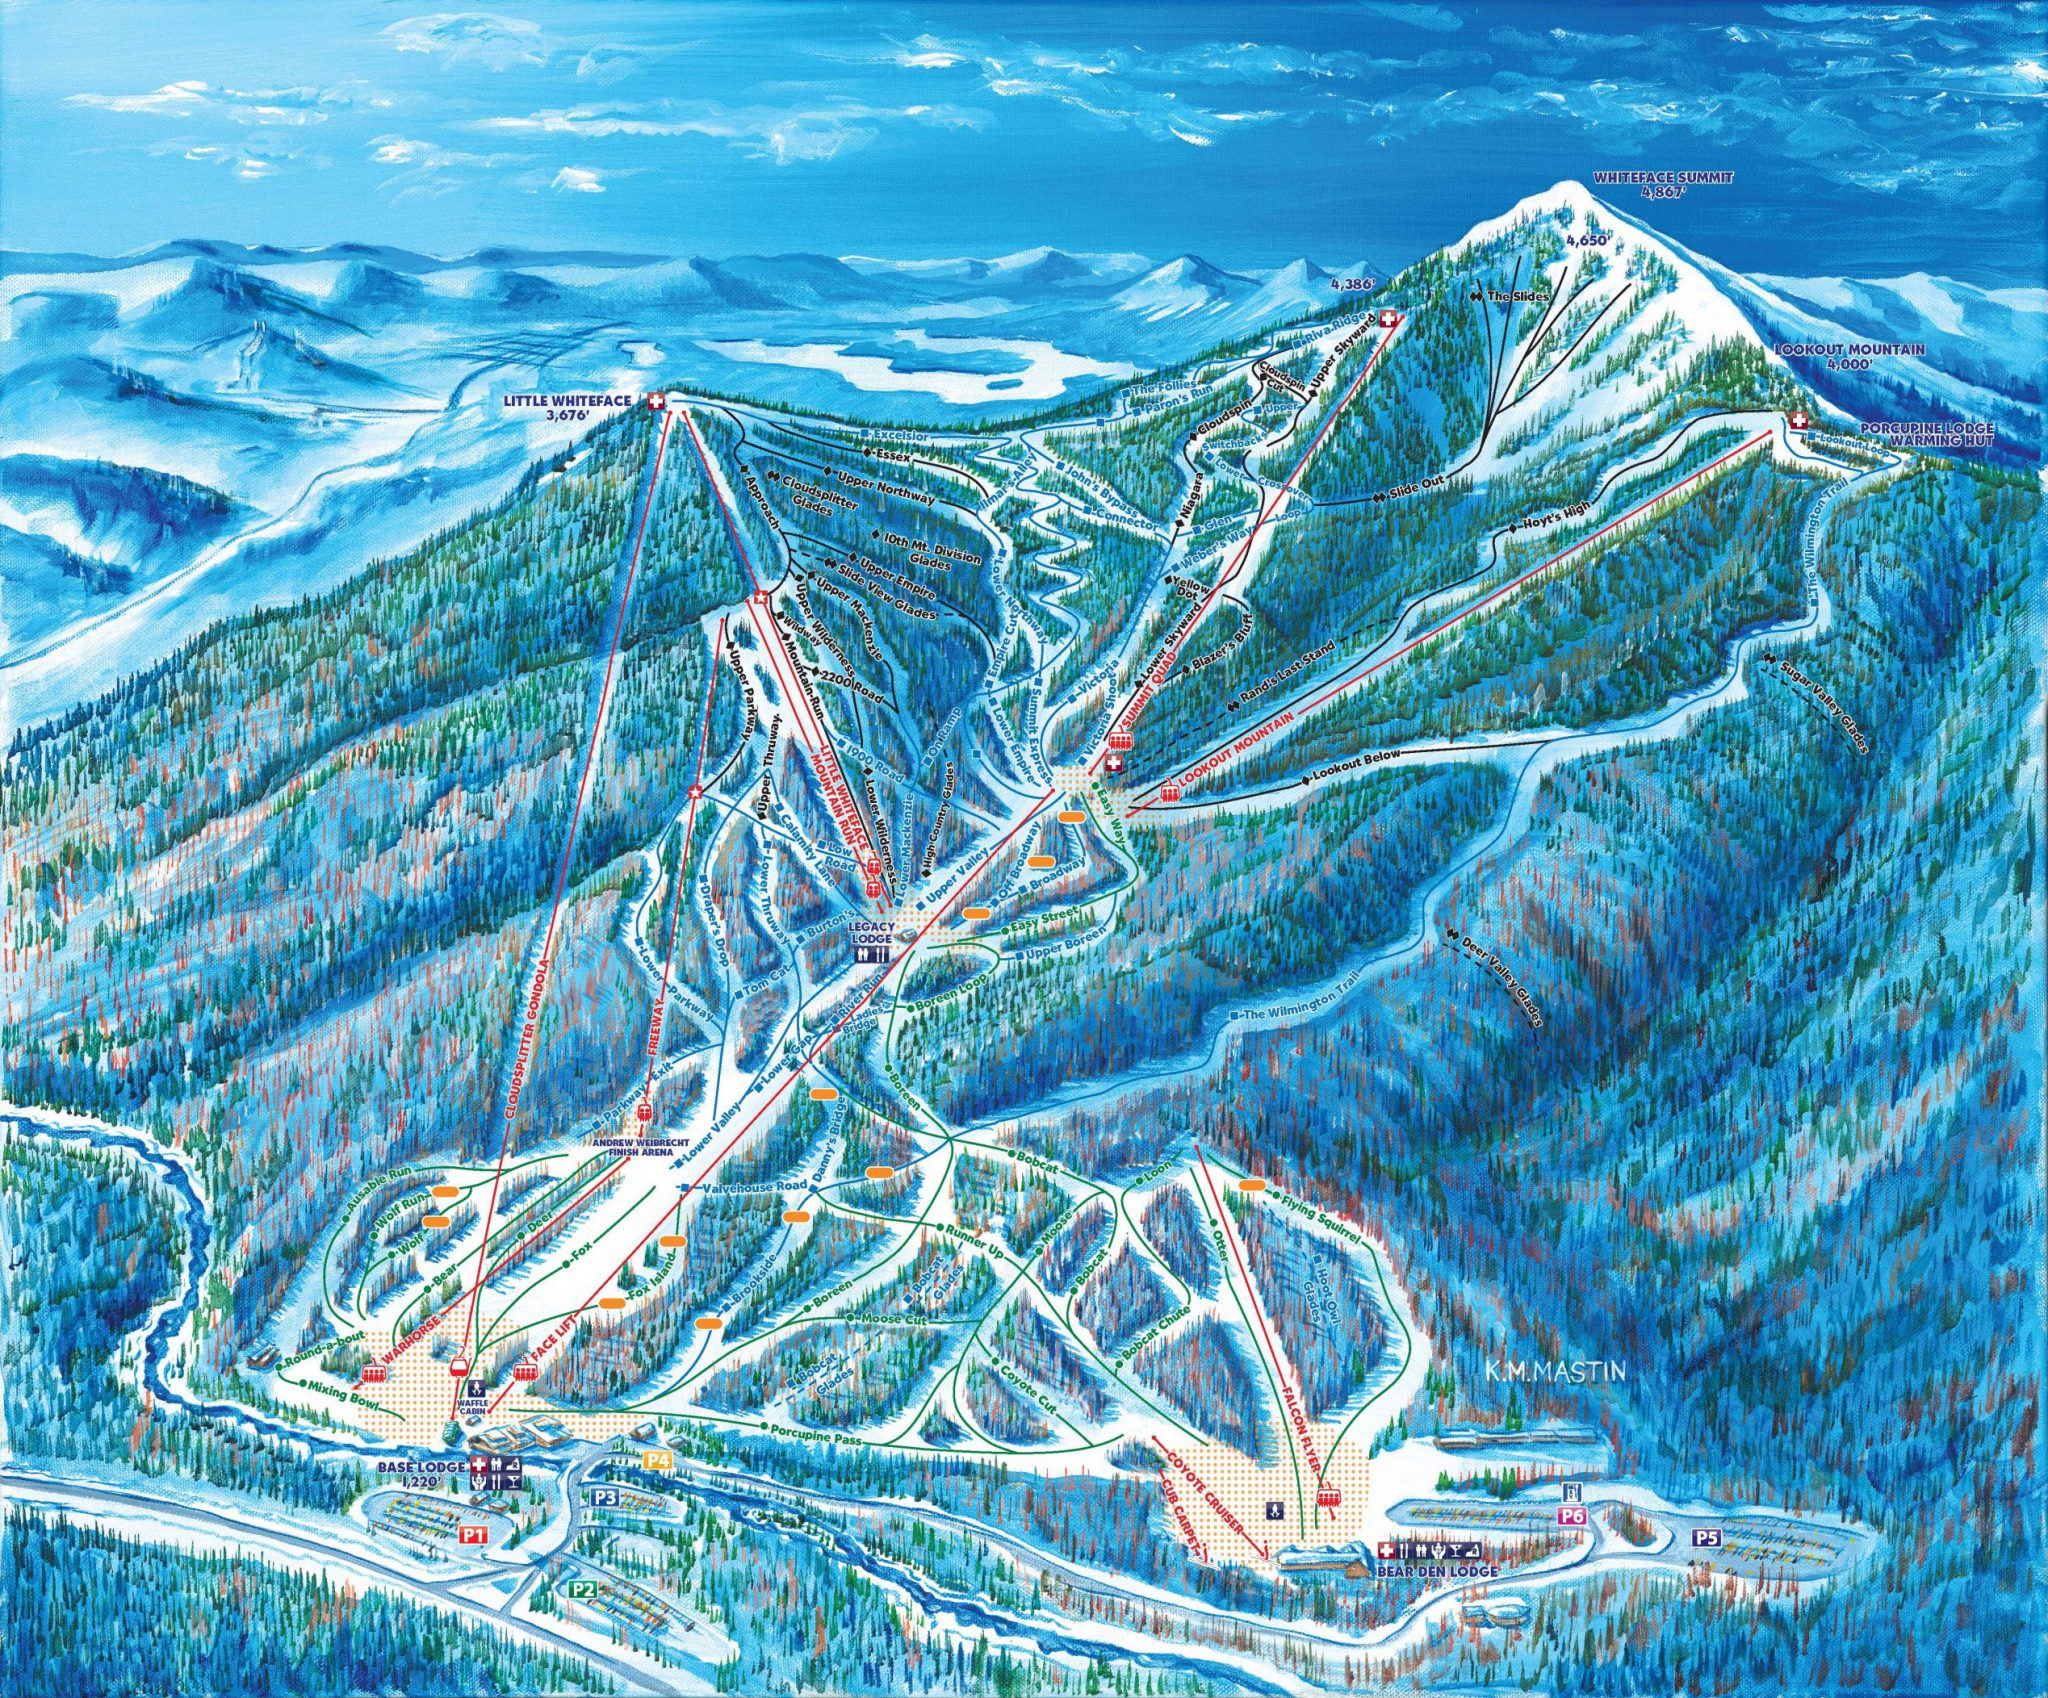 Whiteface Review - Ski North America's Top 100 Resorts